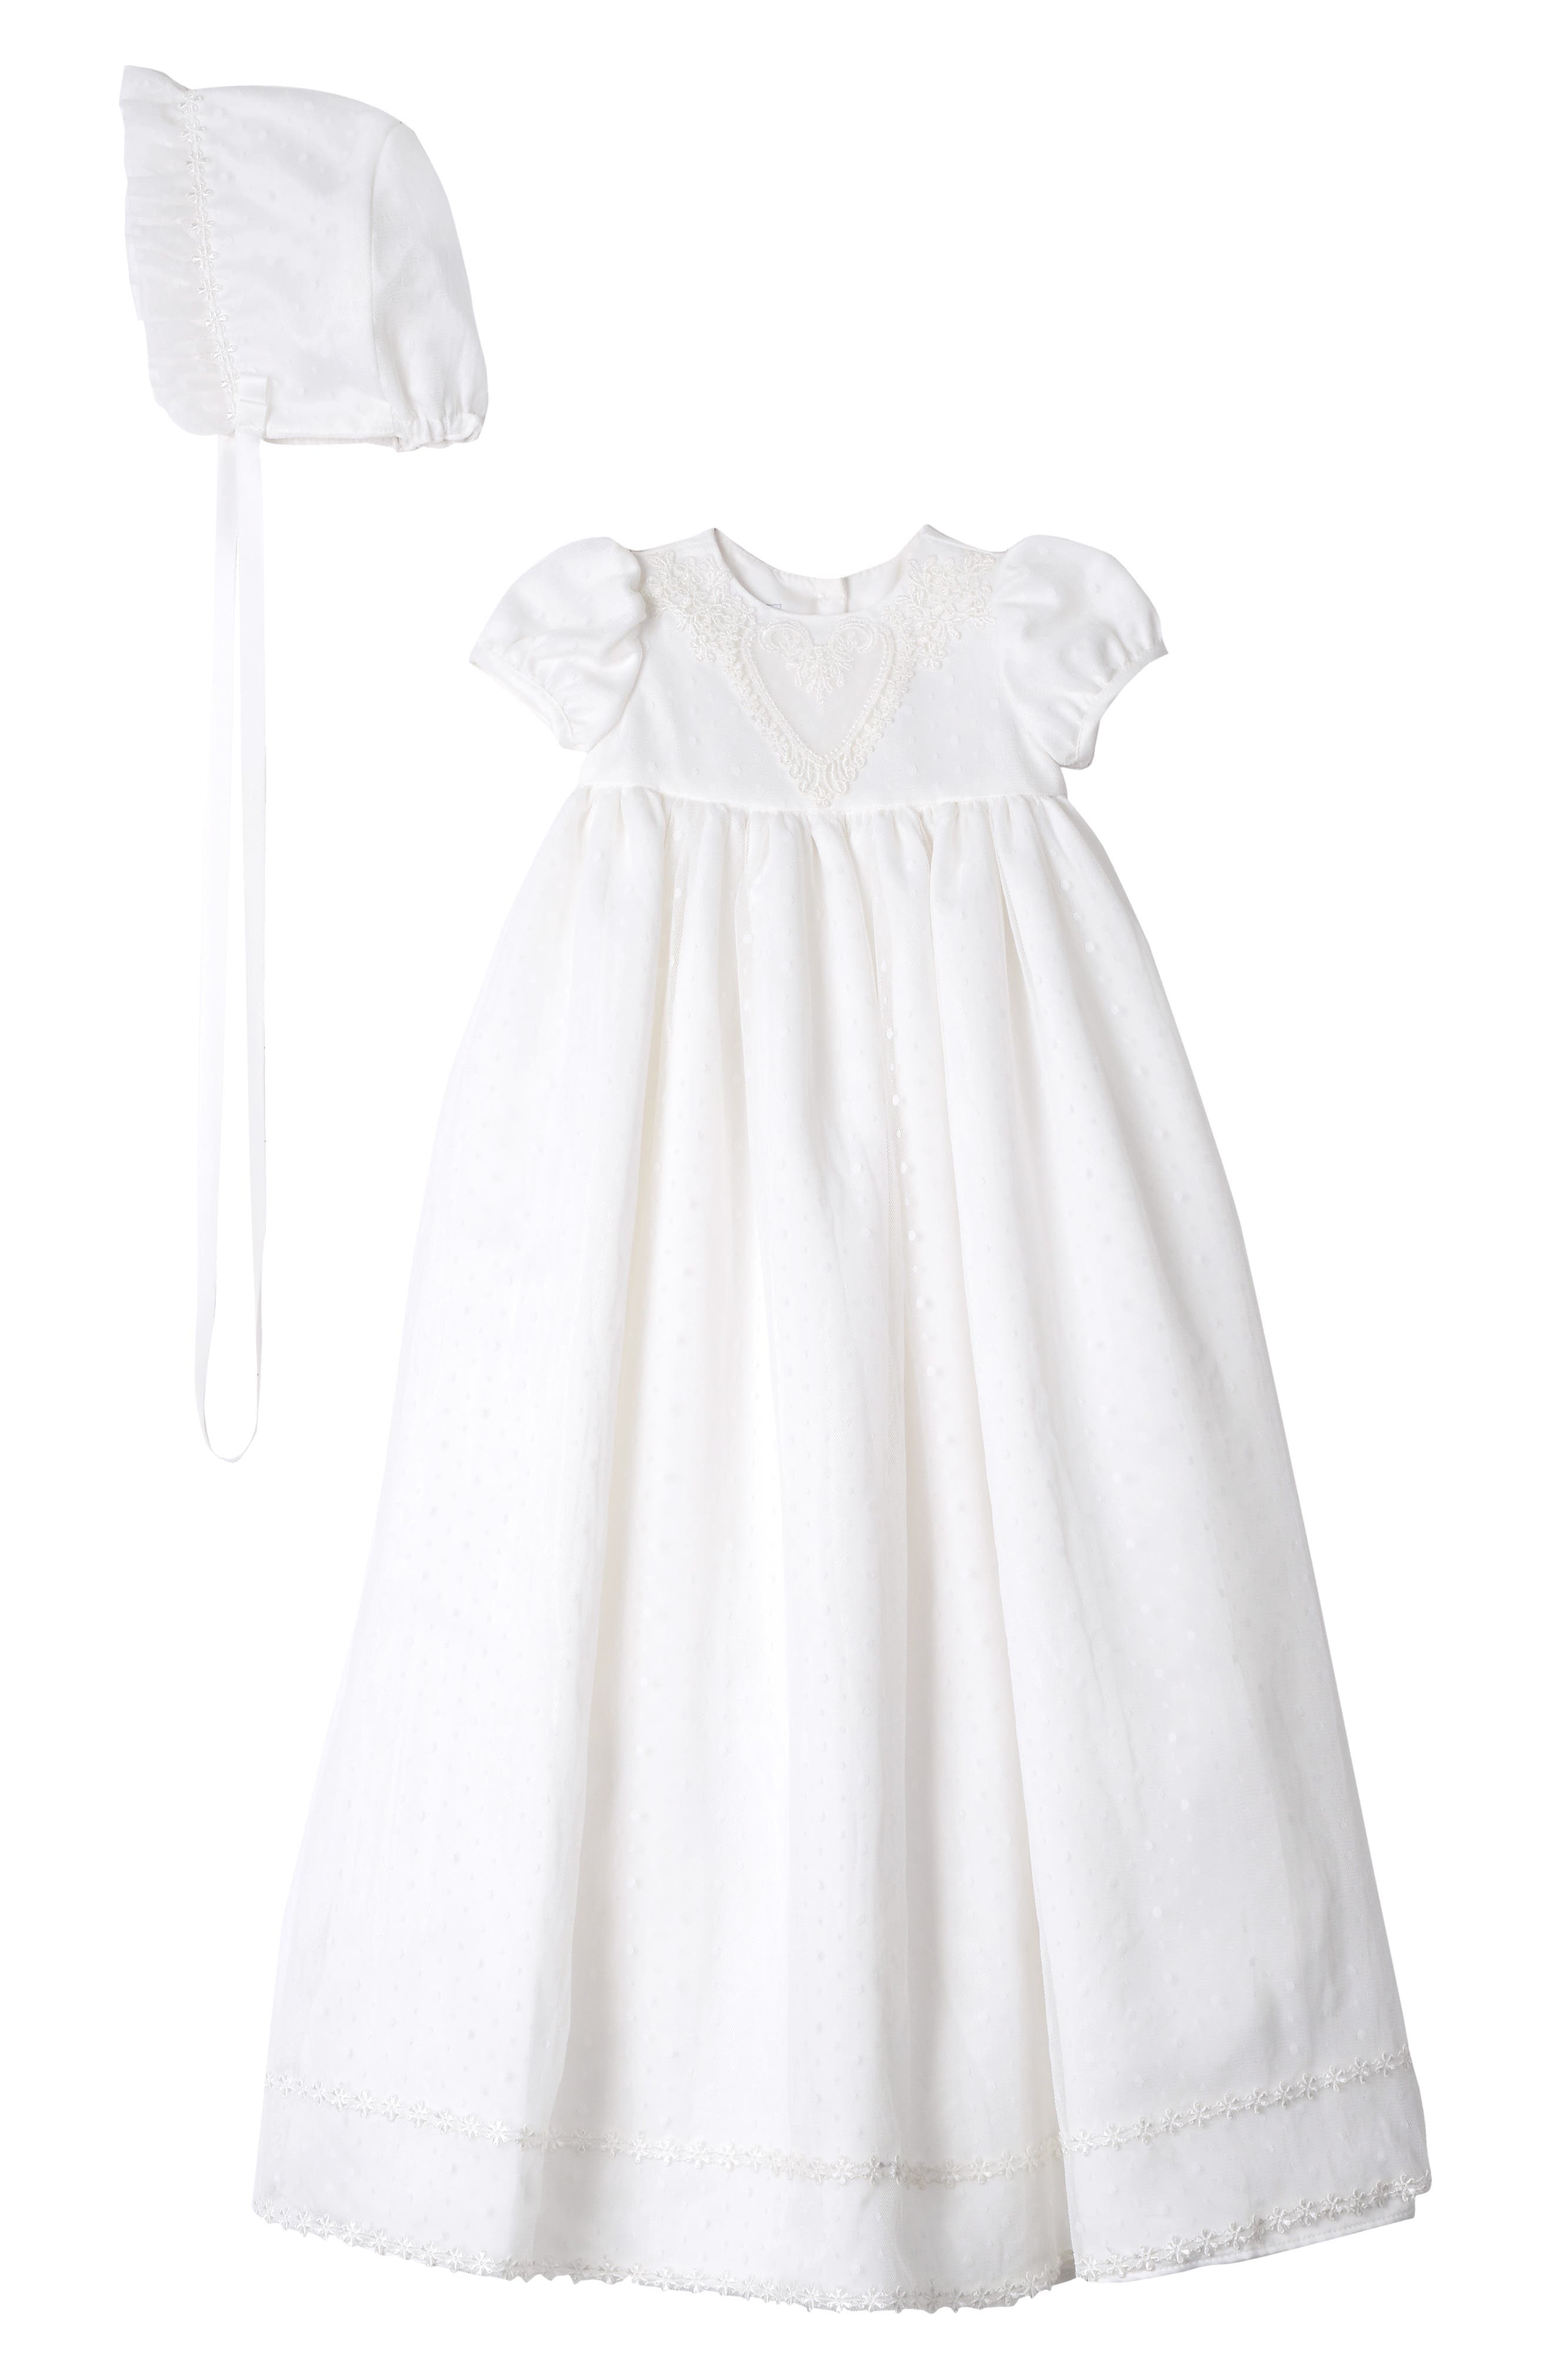 kids baptism outfits